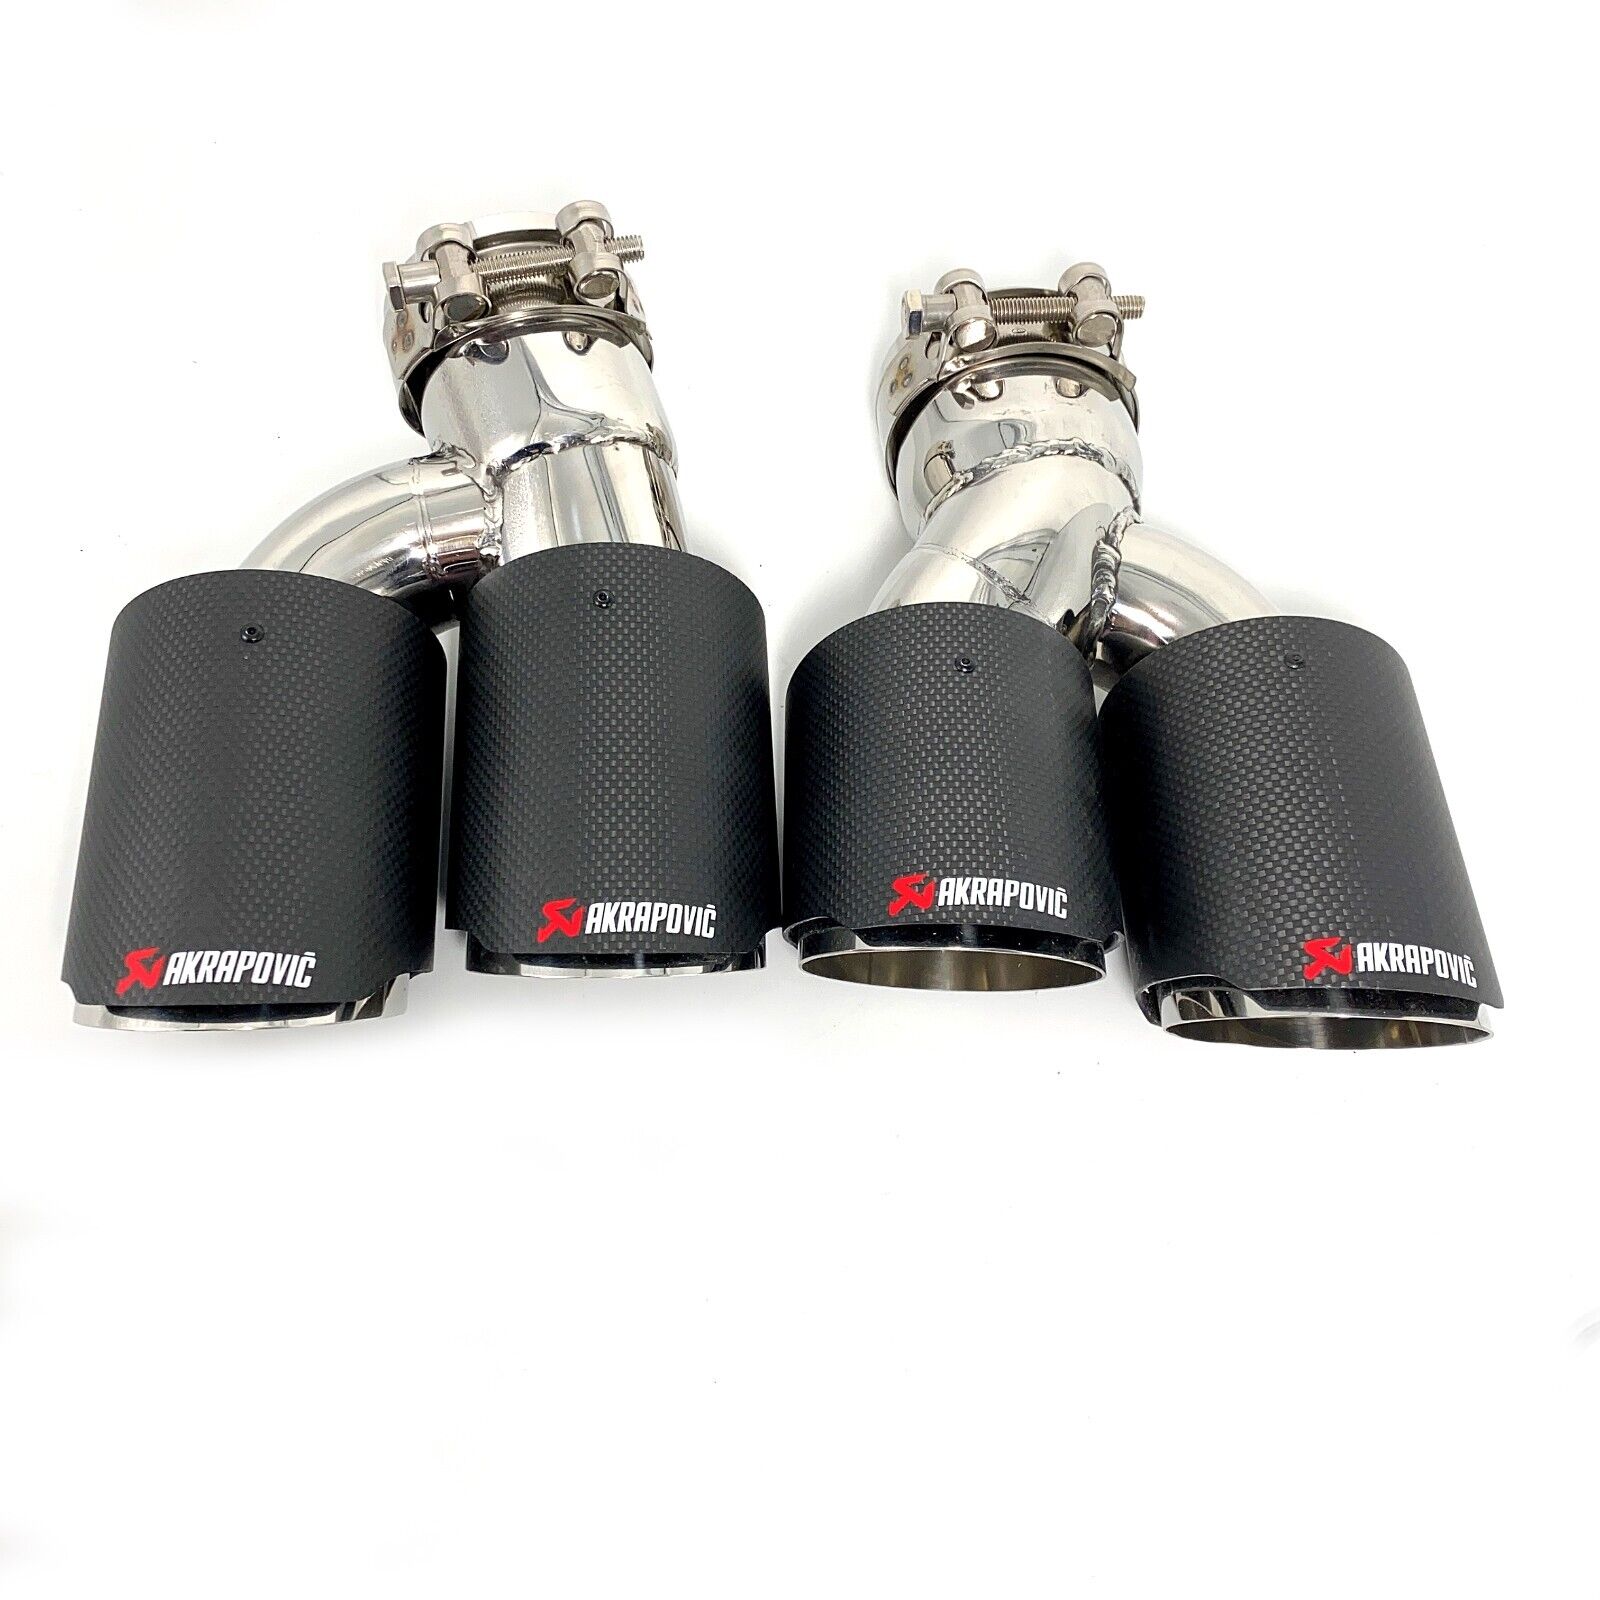 1 Pair Akrapovic Dual Exhaust Tip Carbon Tailpipe For BMW 525i 528i 530i G30 G31